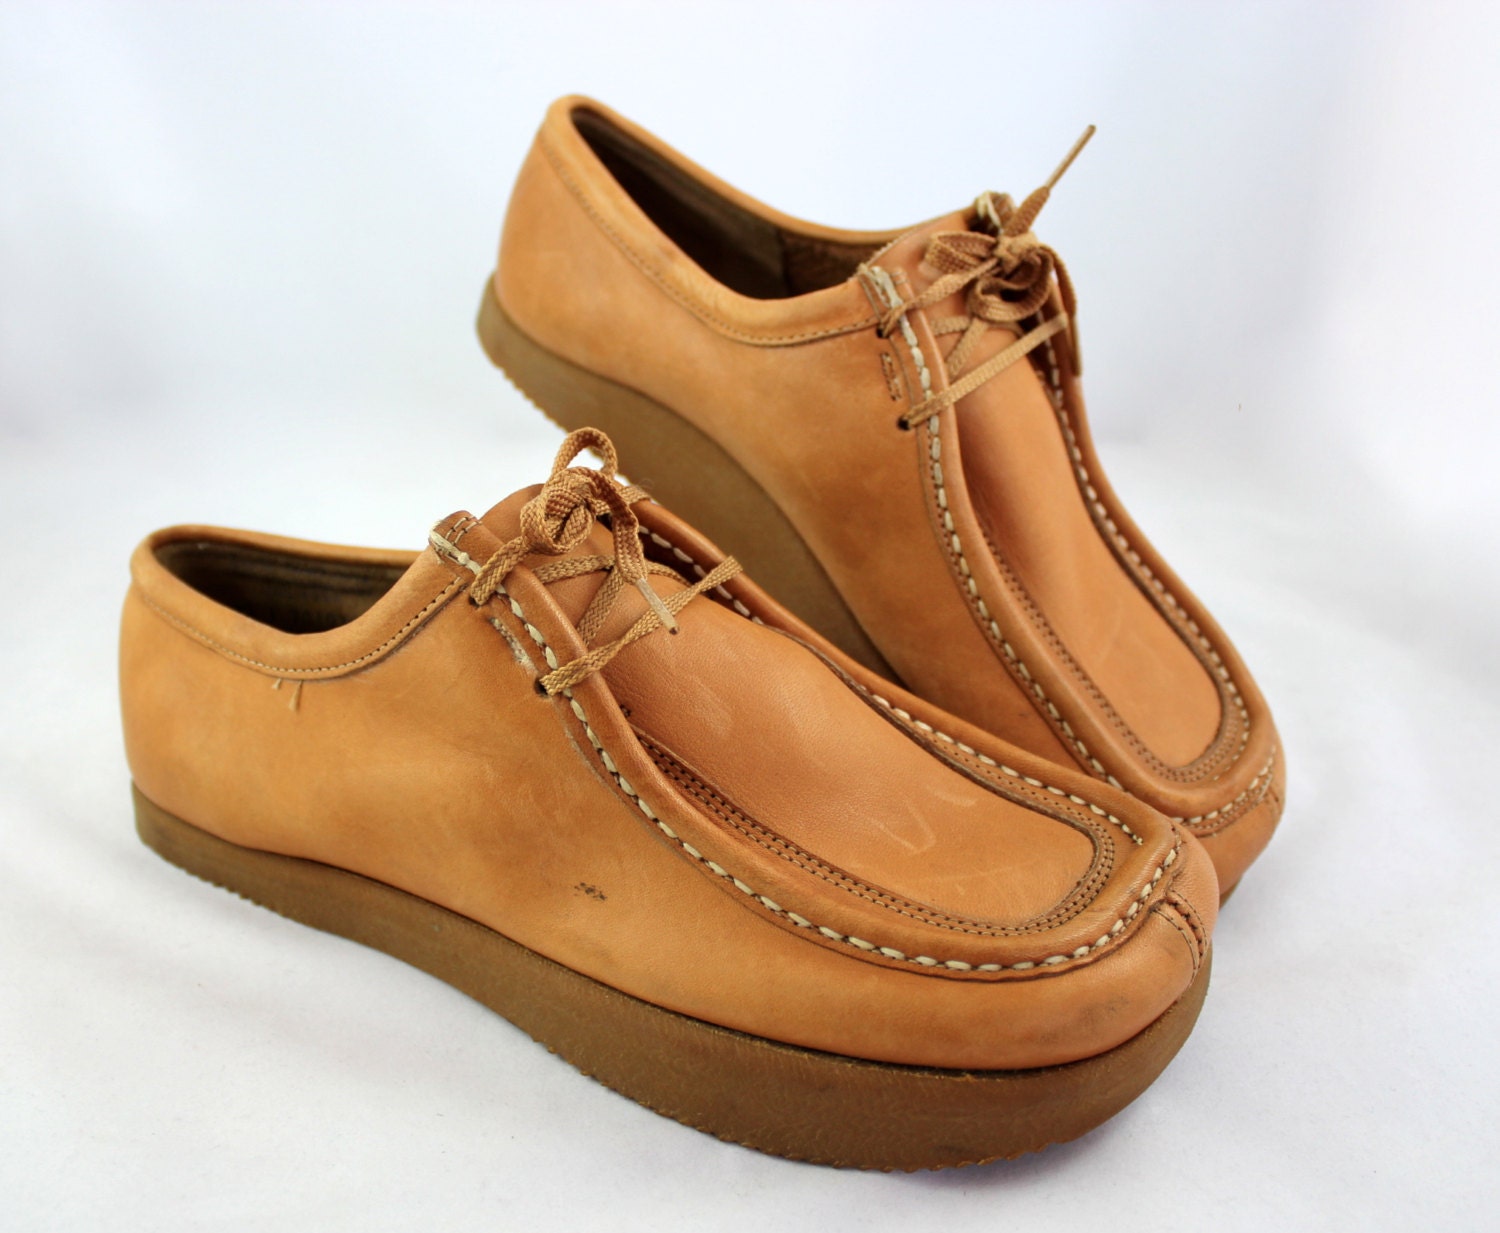 Vintage Lindsay Weir Earth Shoes by ANNE KALSO in Honey